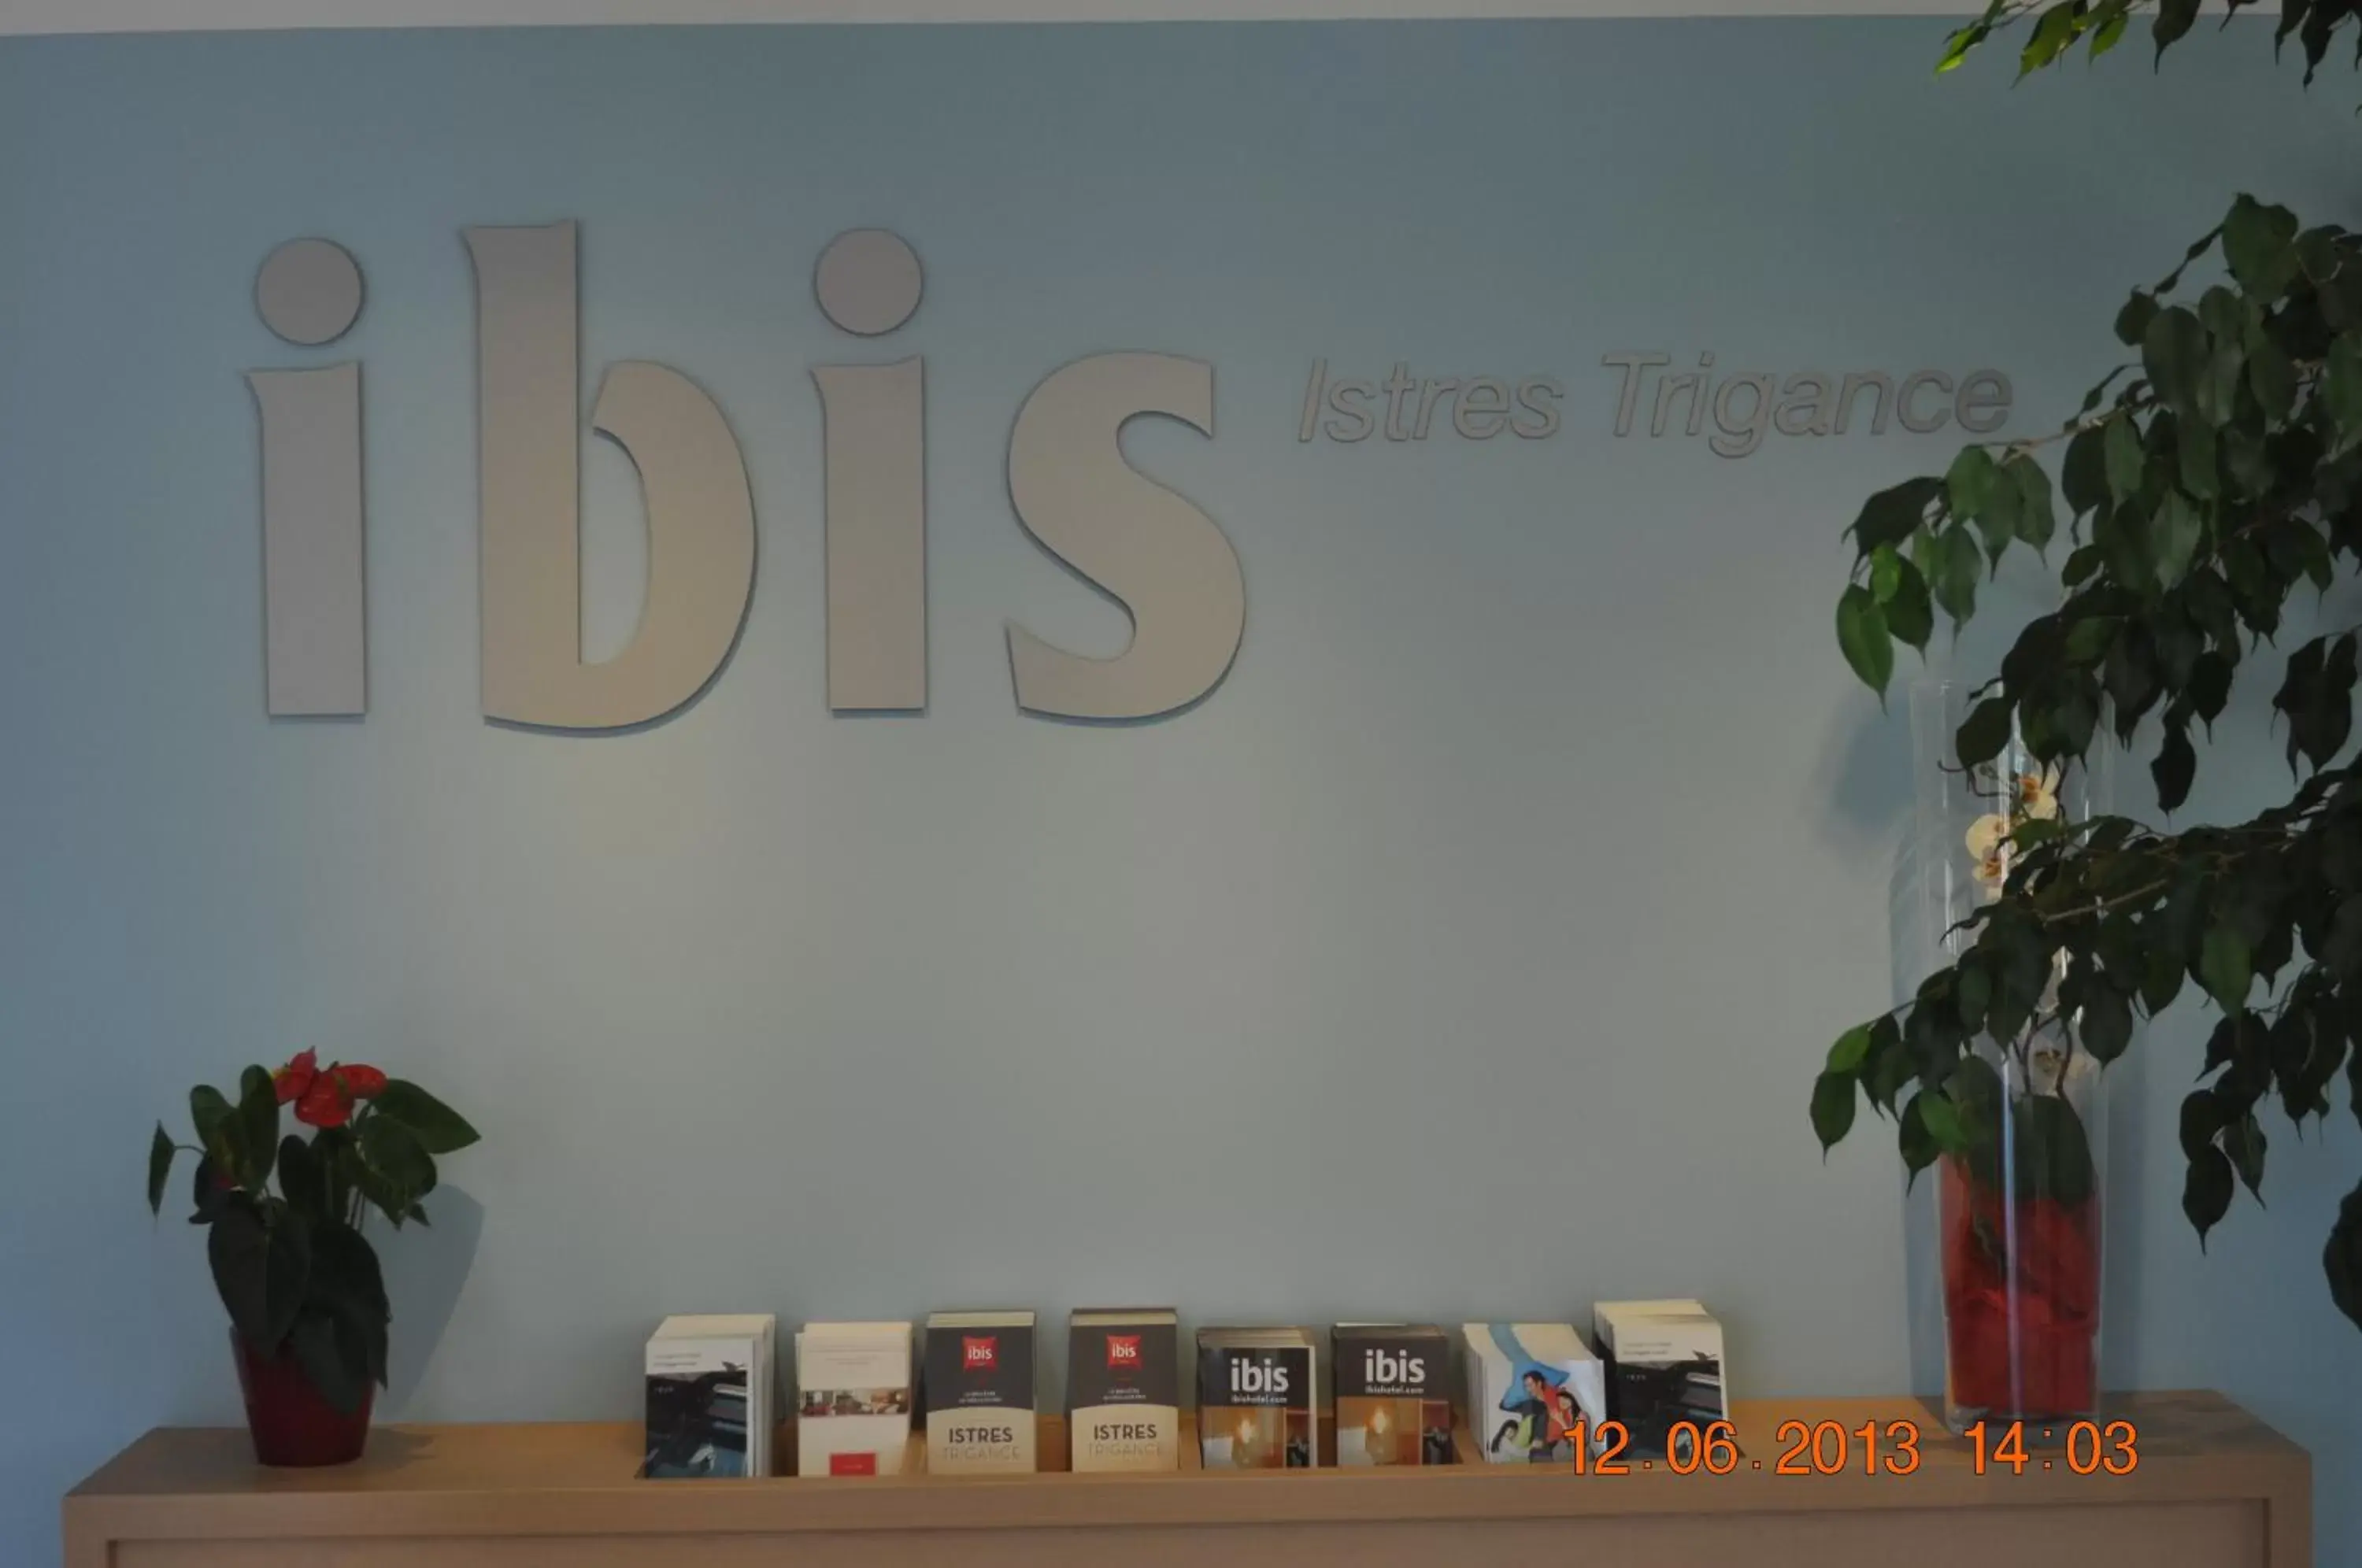 Property logo or sign in ibis Istres Trigance